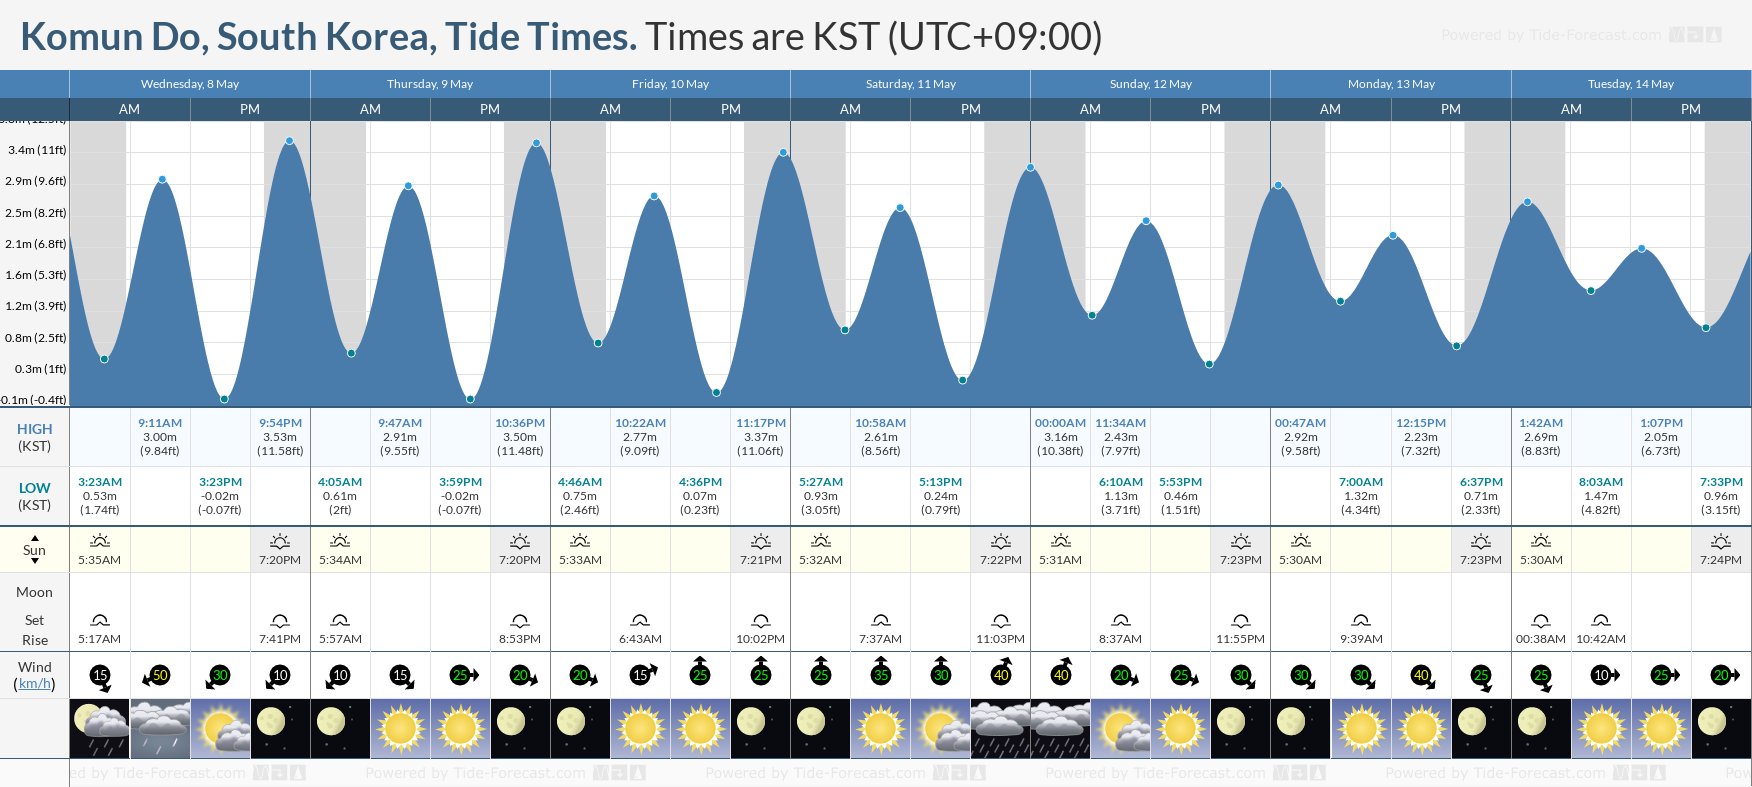 Komun Do, South Korea Tide Chart including high and low tide tide times for the next 7 days